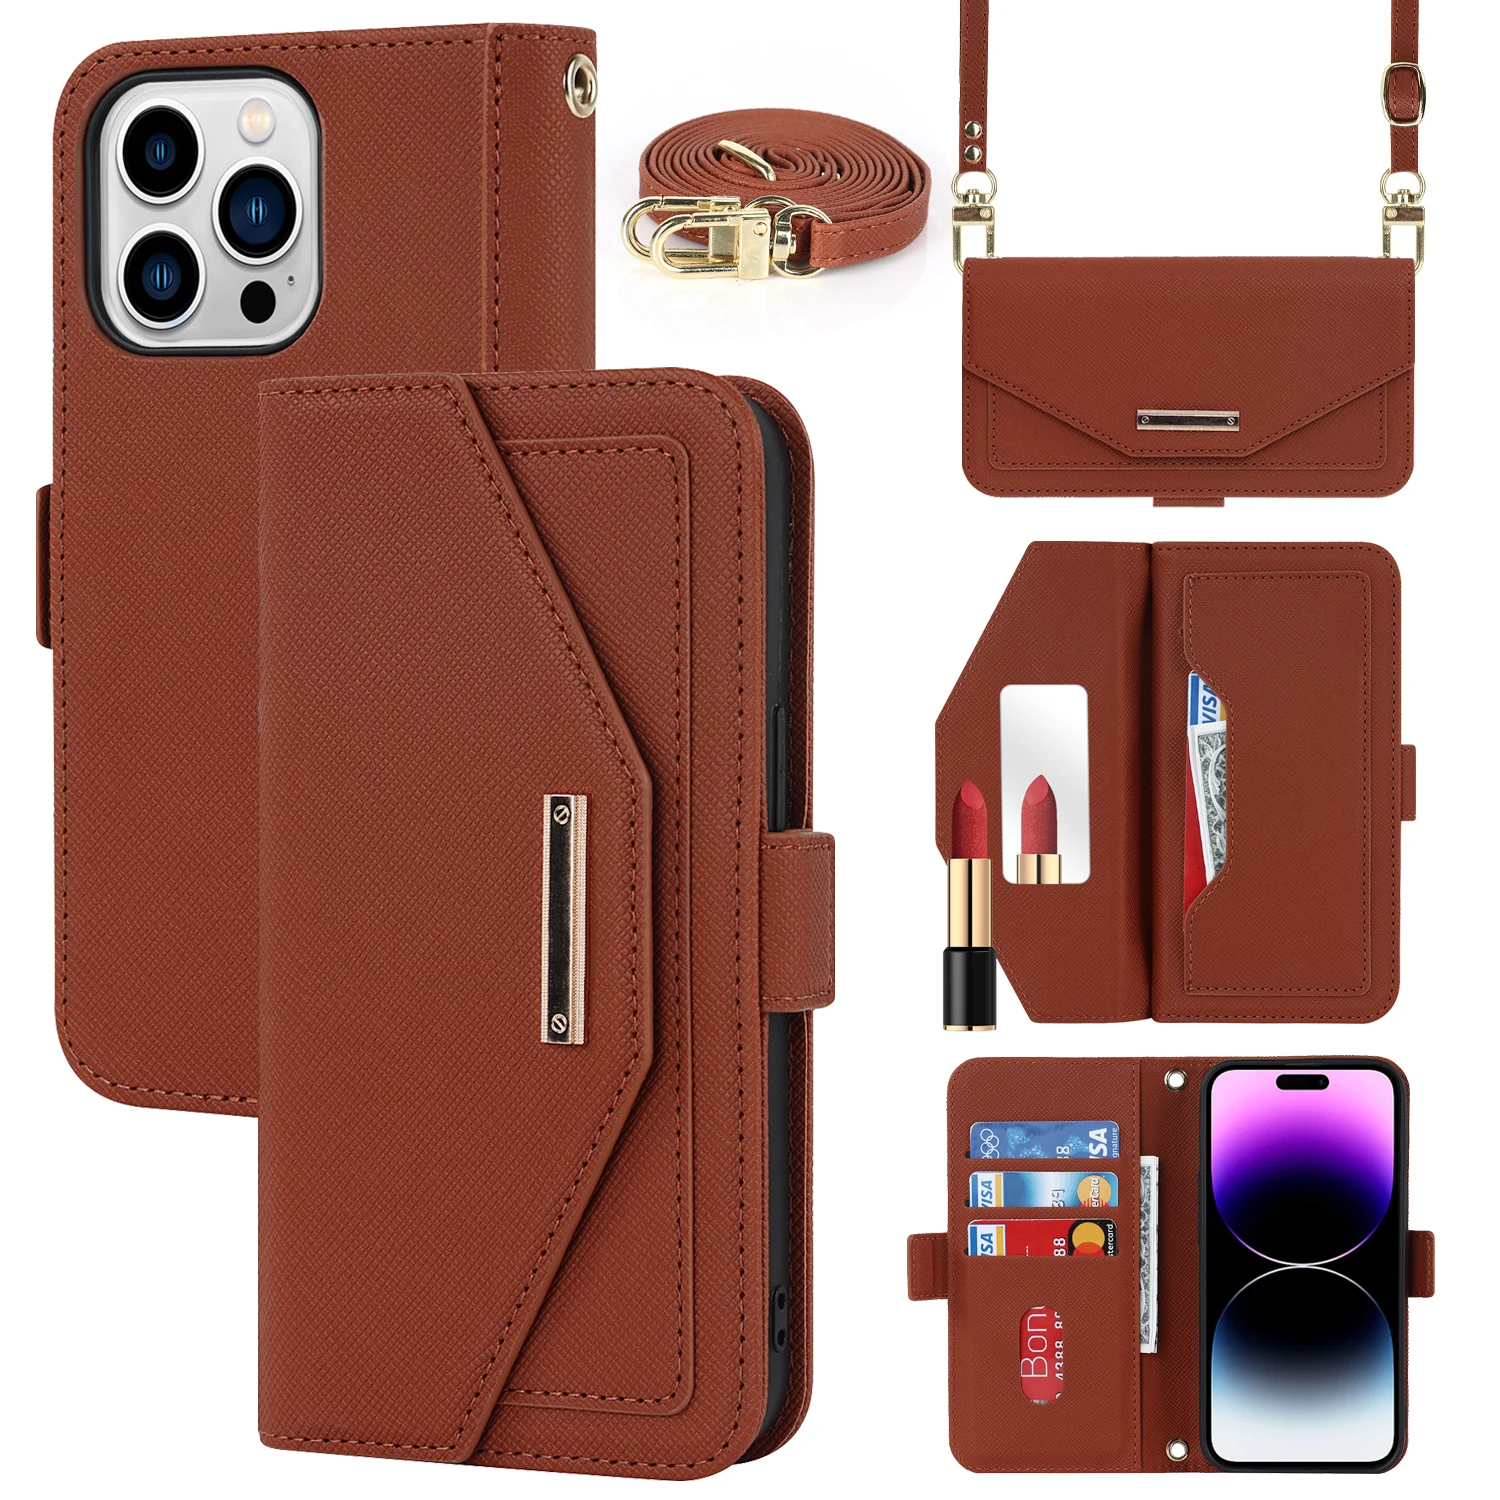 Leather Wallet Card Holder Case For iPhone 14 Pro Max 13 12 mini 11 Pro 7 8 Plus SE Coque With Long Crossbody Lanyard Cover